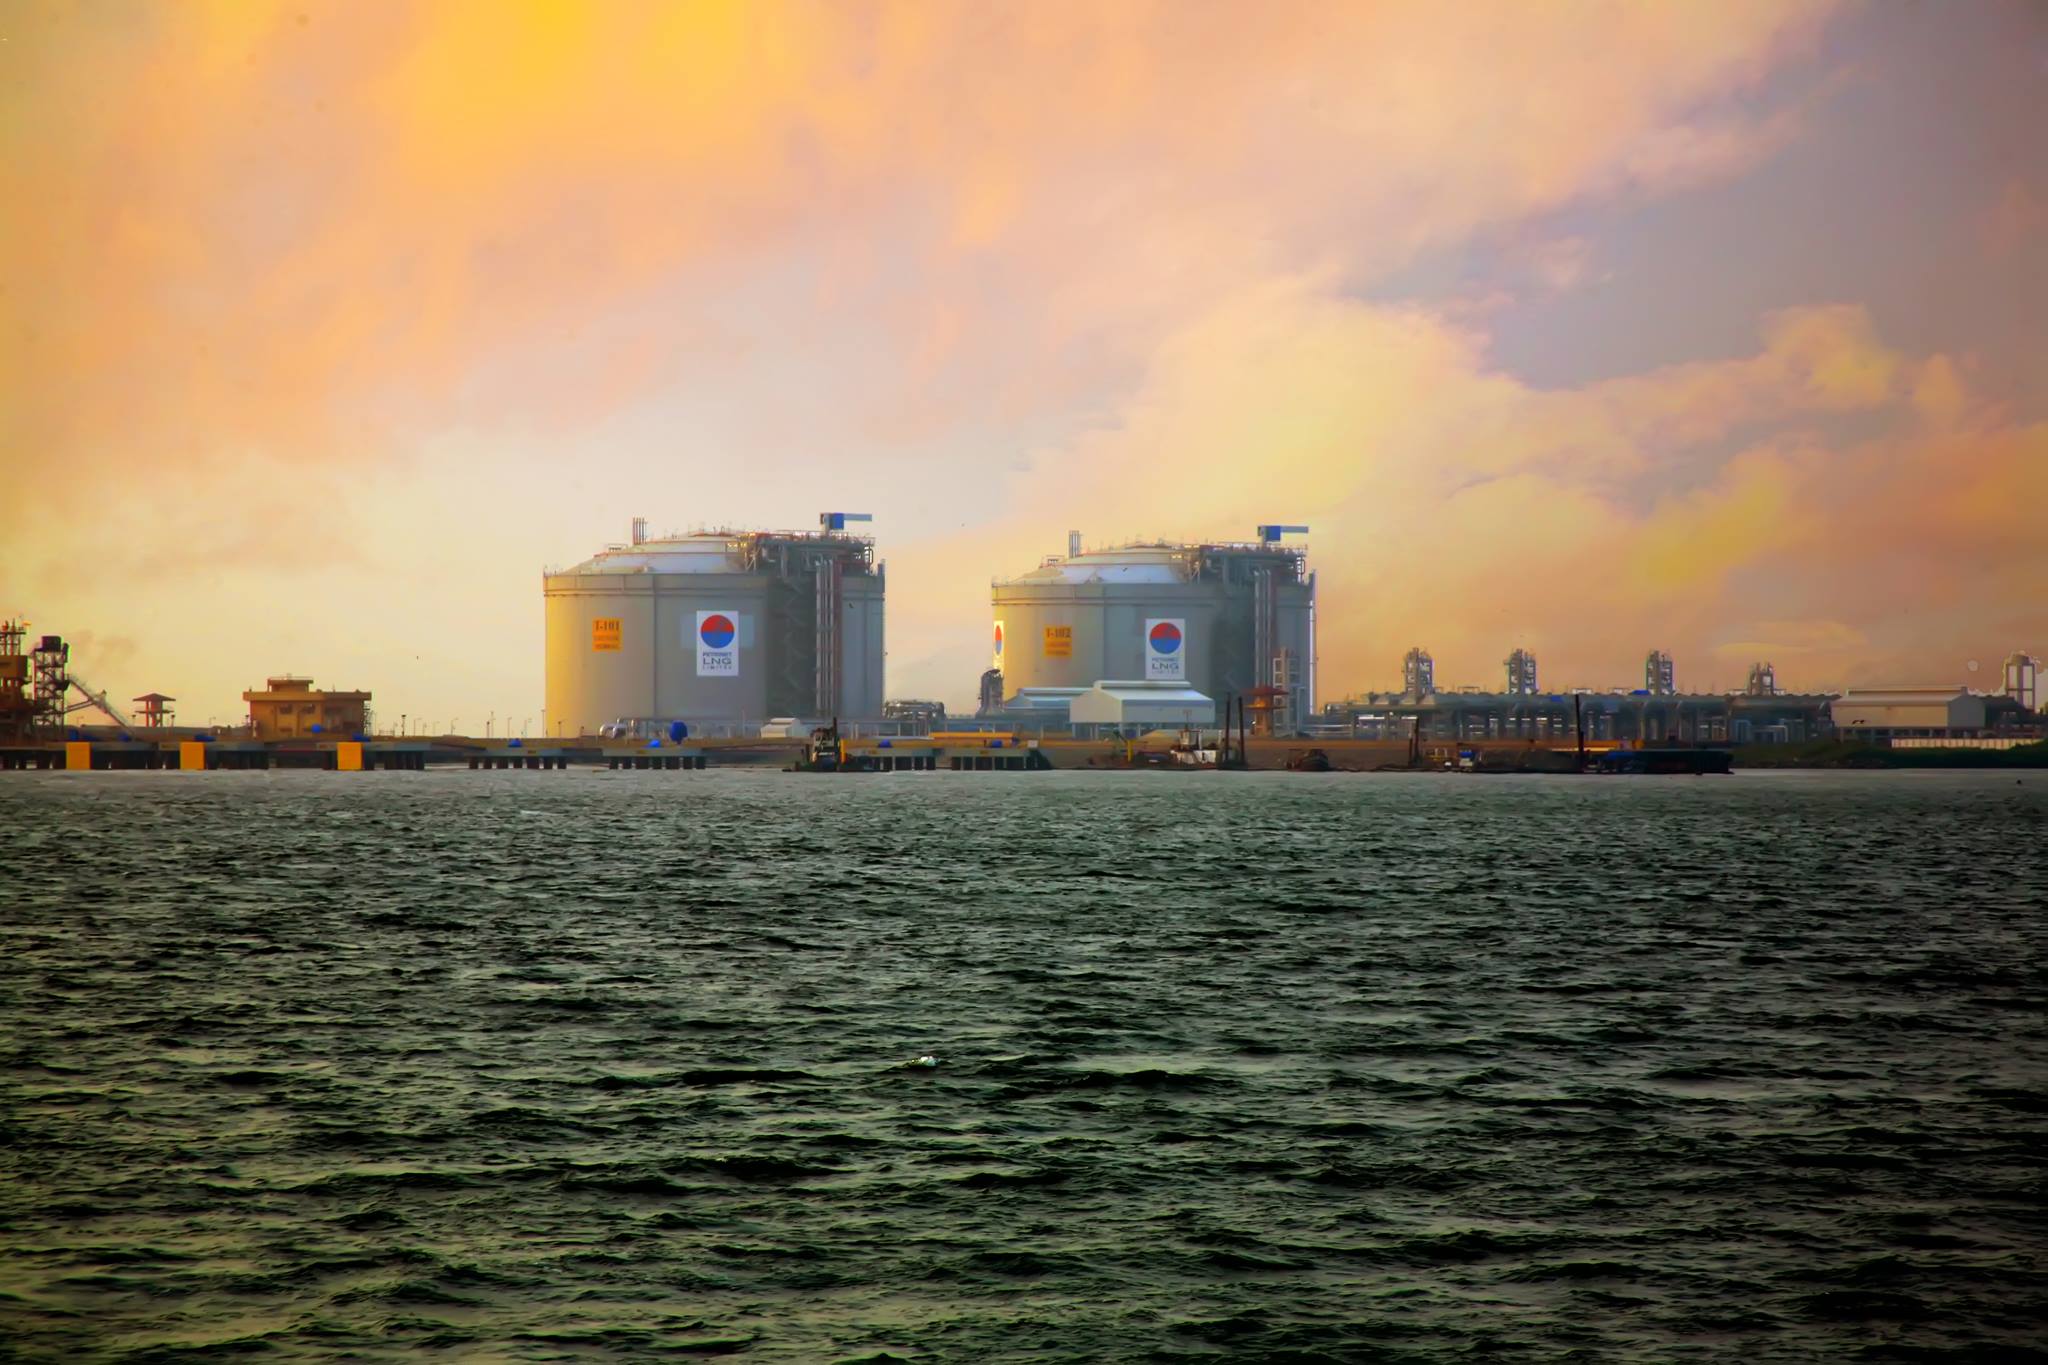 Petronet LNG boasts record profit in FY 2019-2020